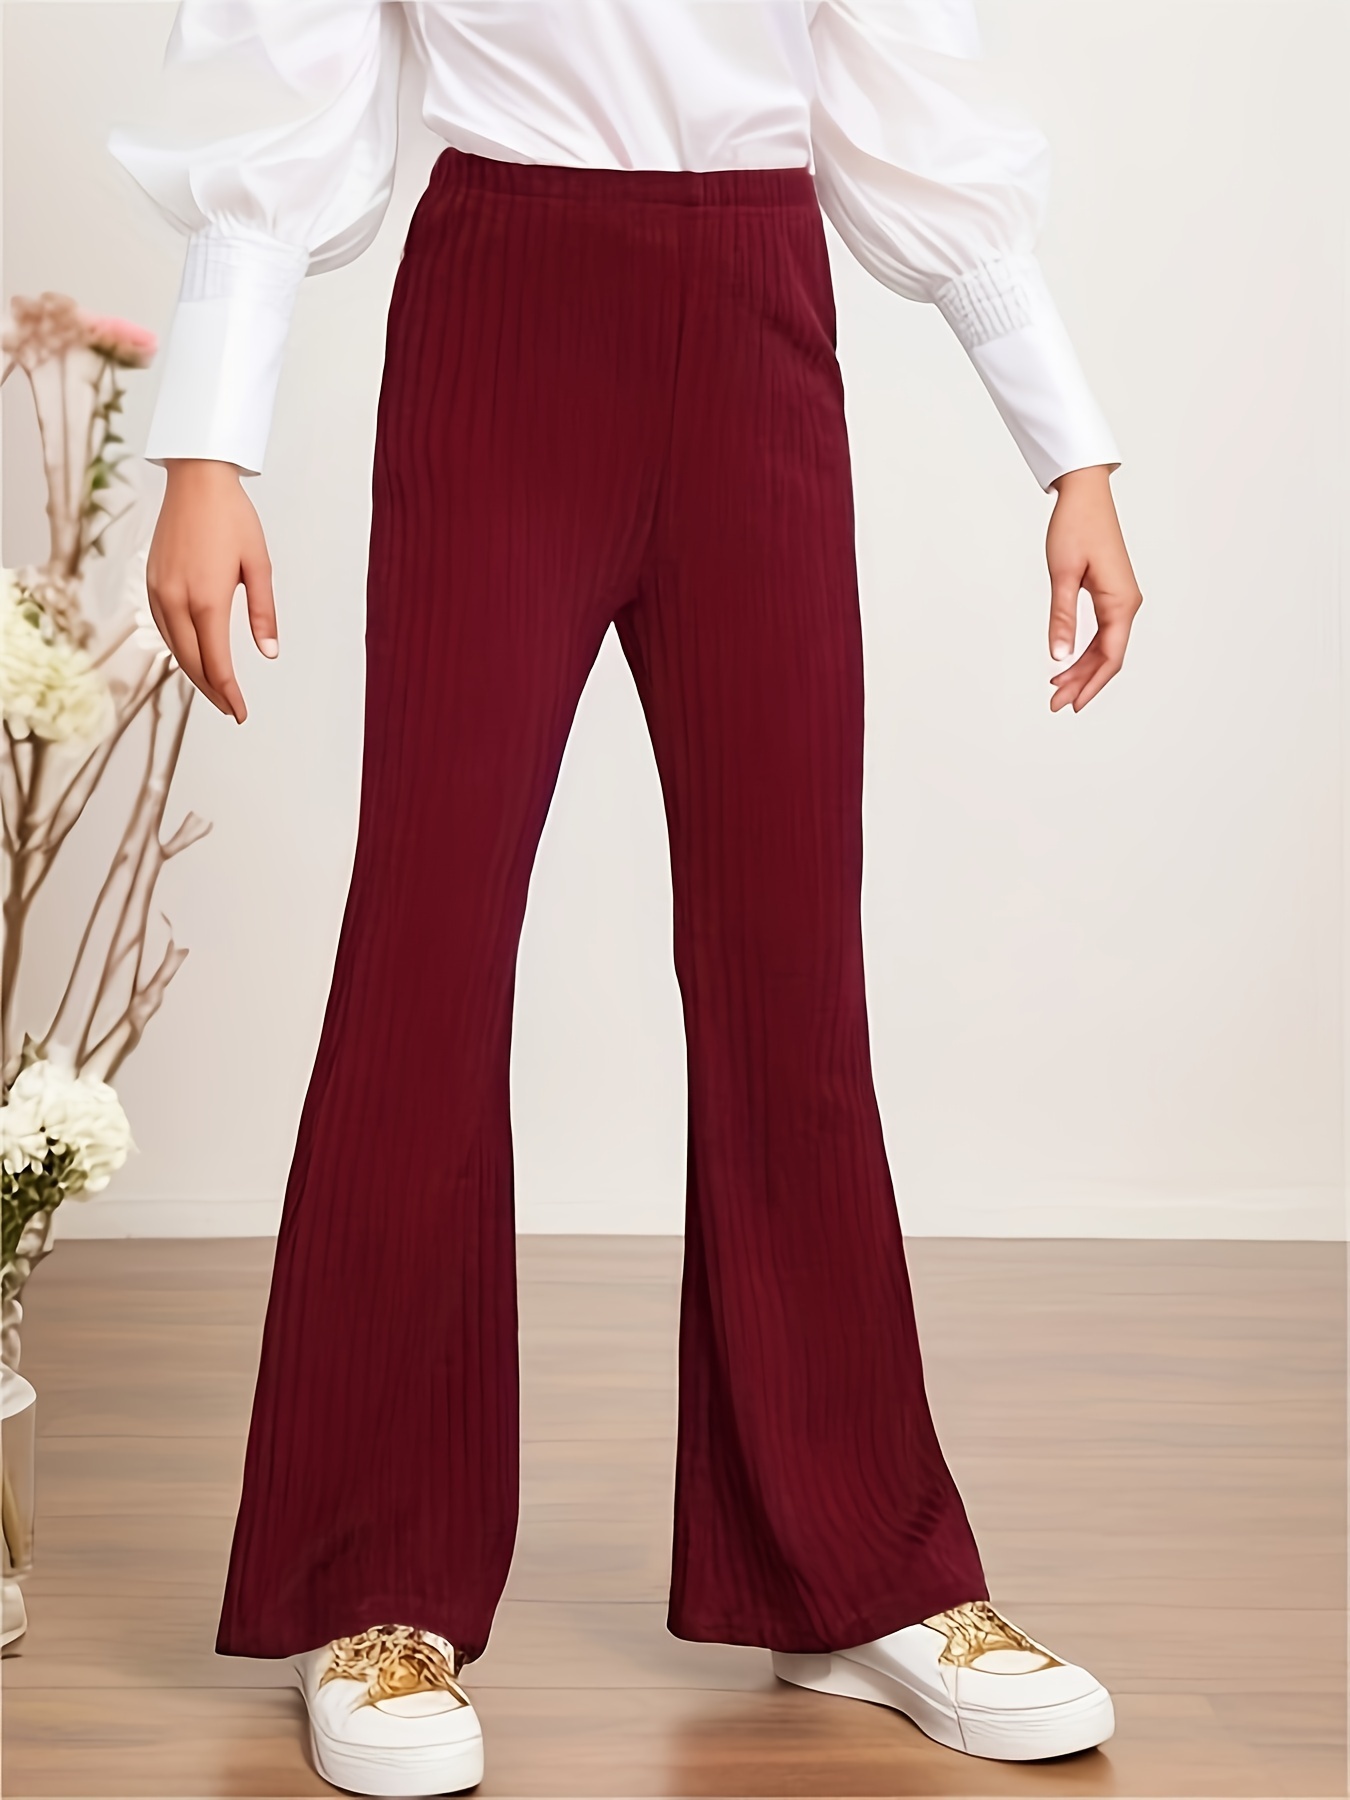 Trousers Skinny Pants Bell Bottom Long Pants Flared Pants Casual Solid  Fashion